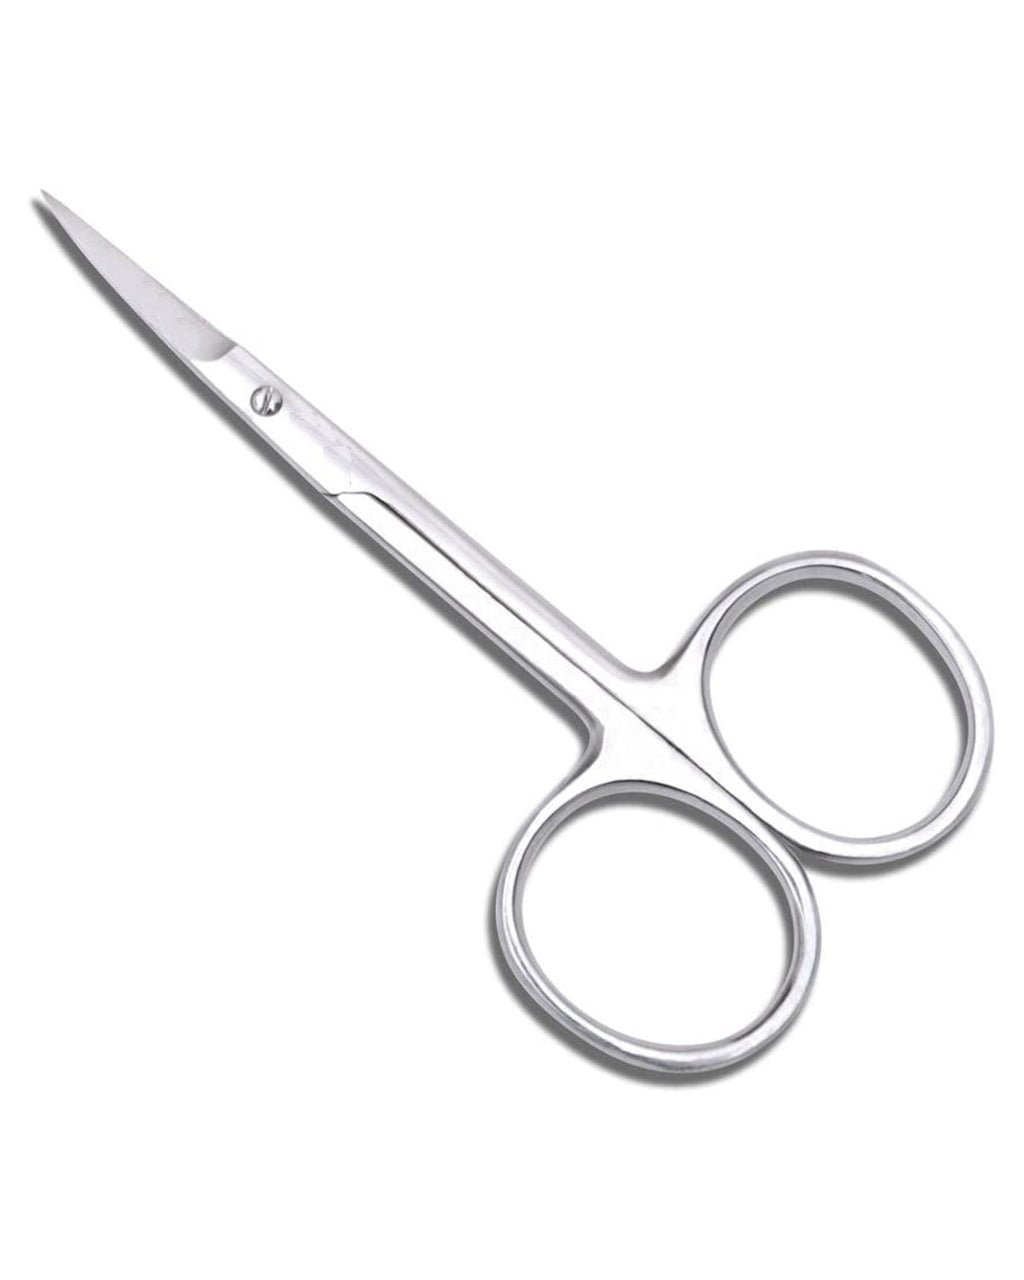 Curved Tipped Scissors